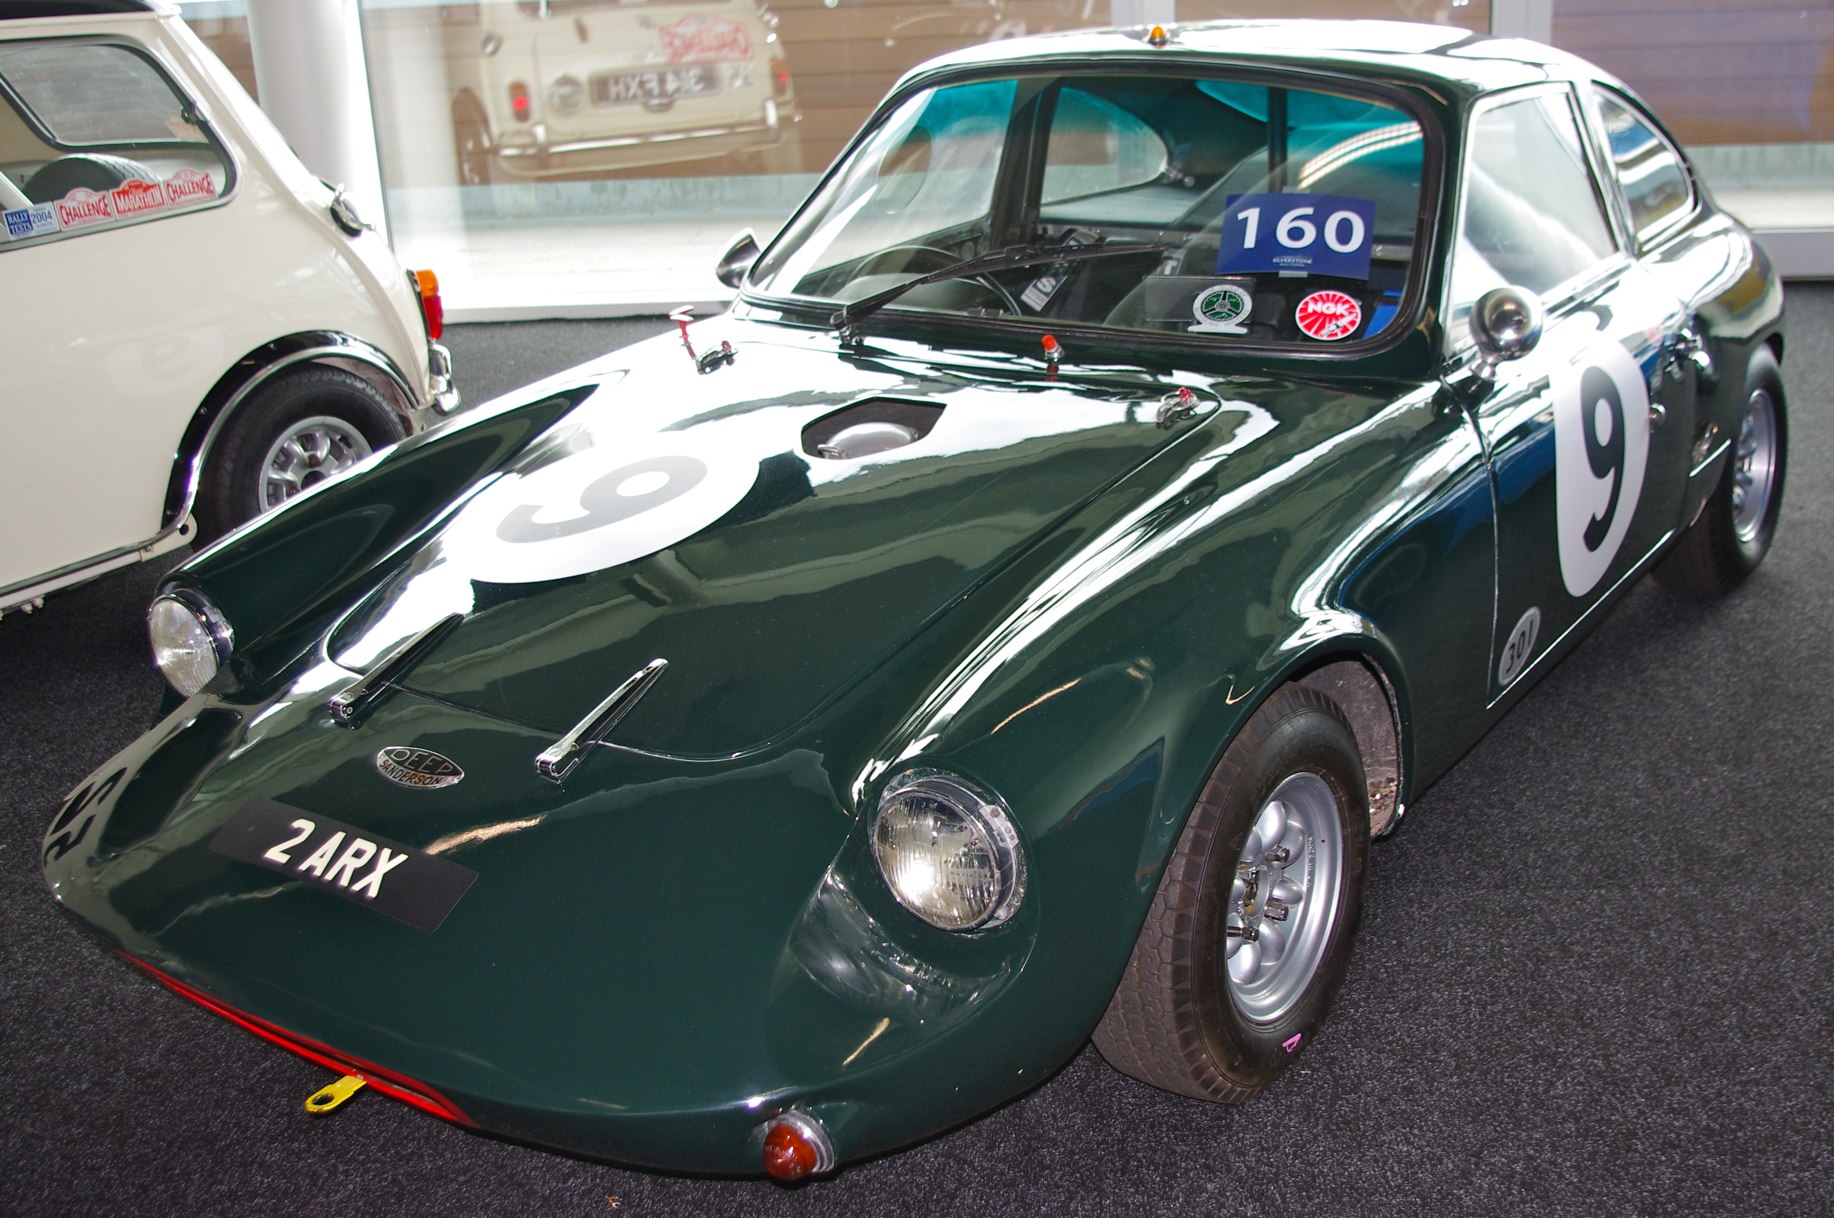 a green sports car on display at an antique show